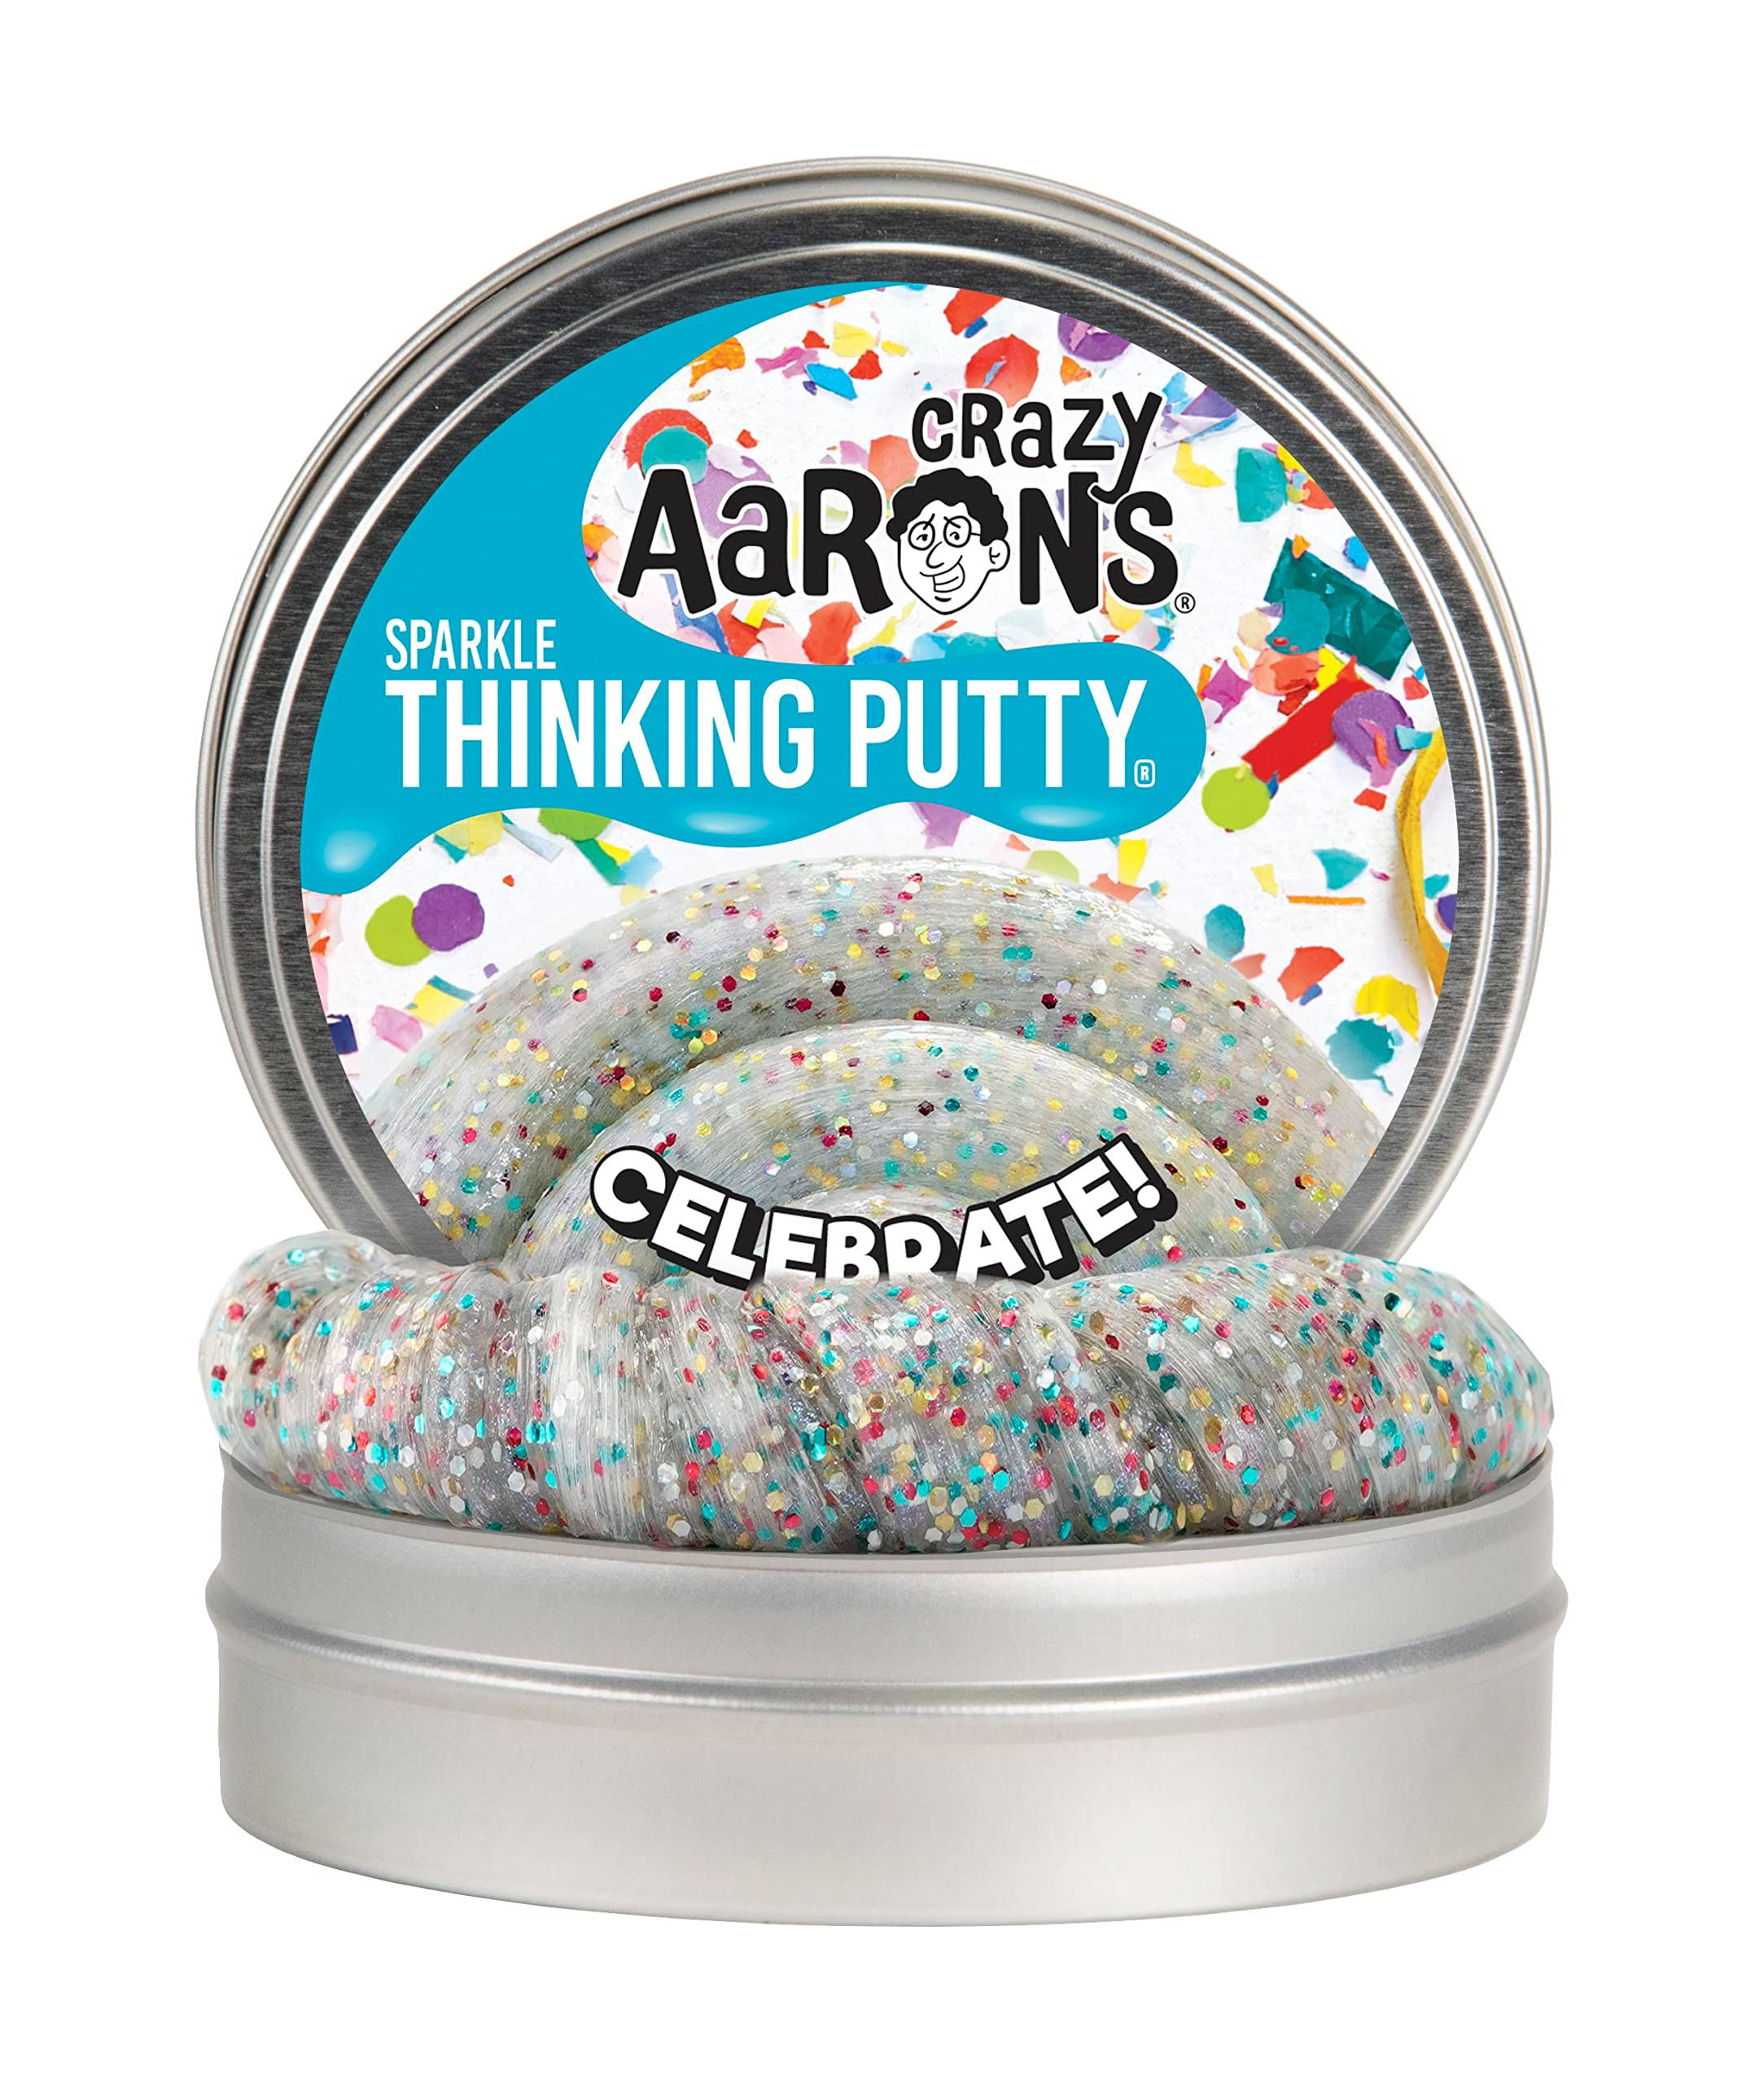 Crazy Aaron's CELEBRATE! Thinking Putty